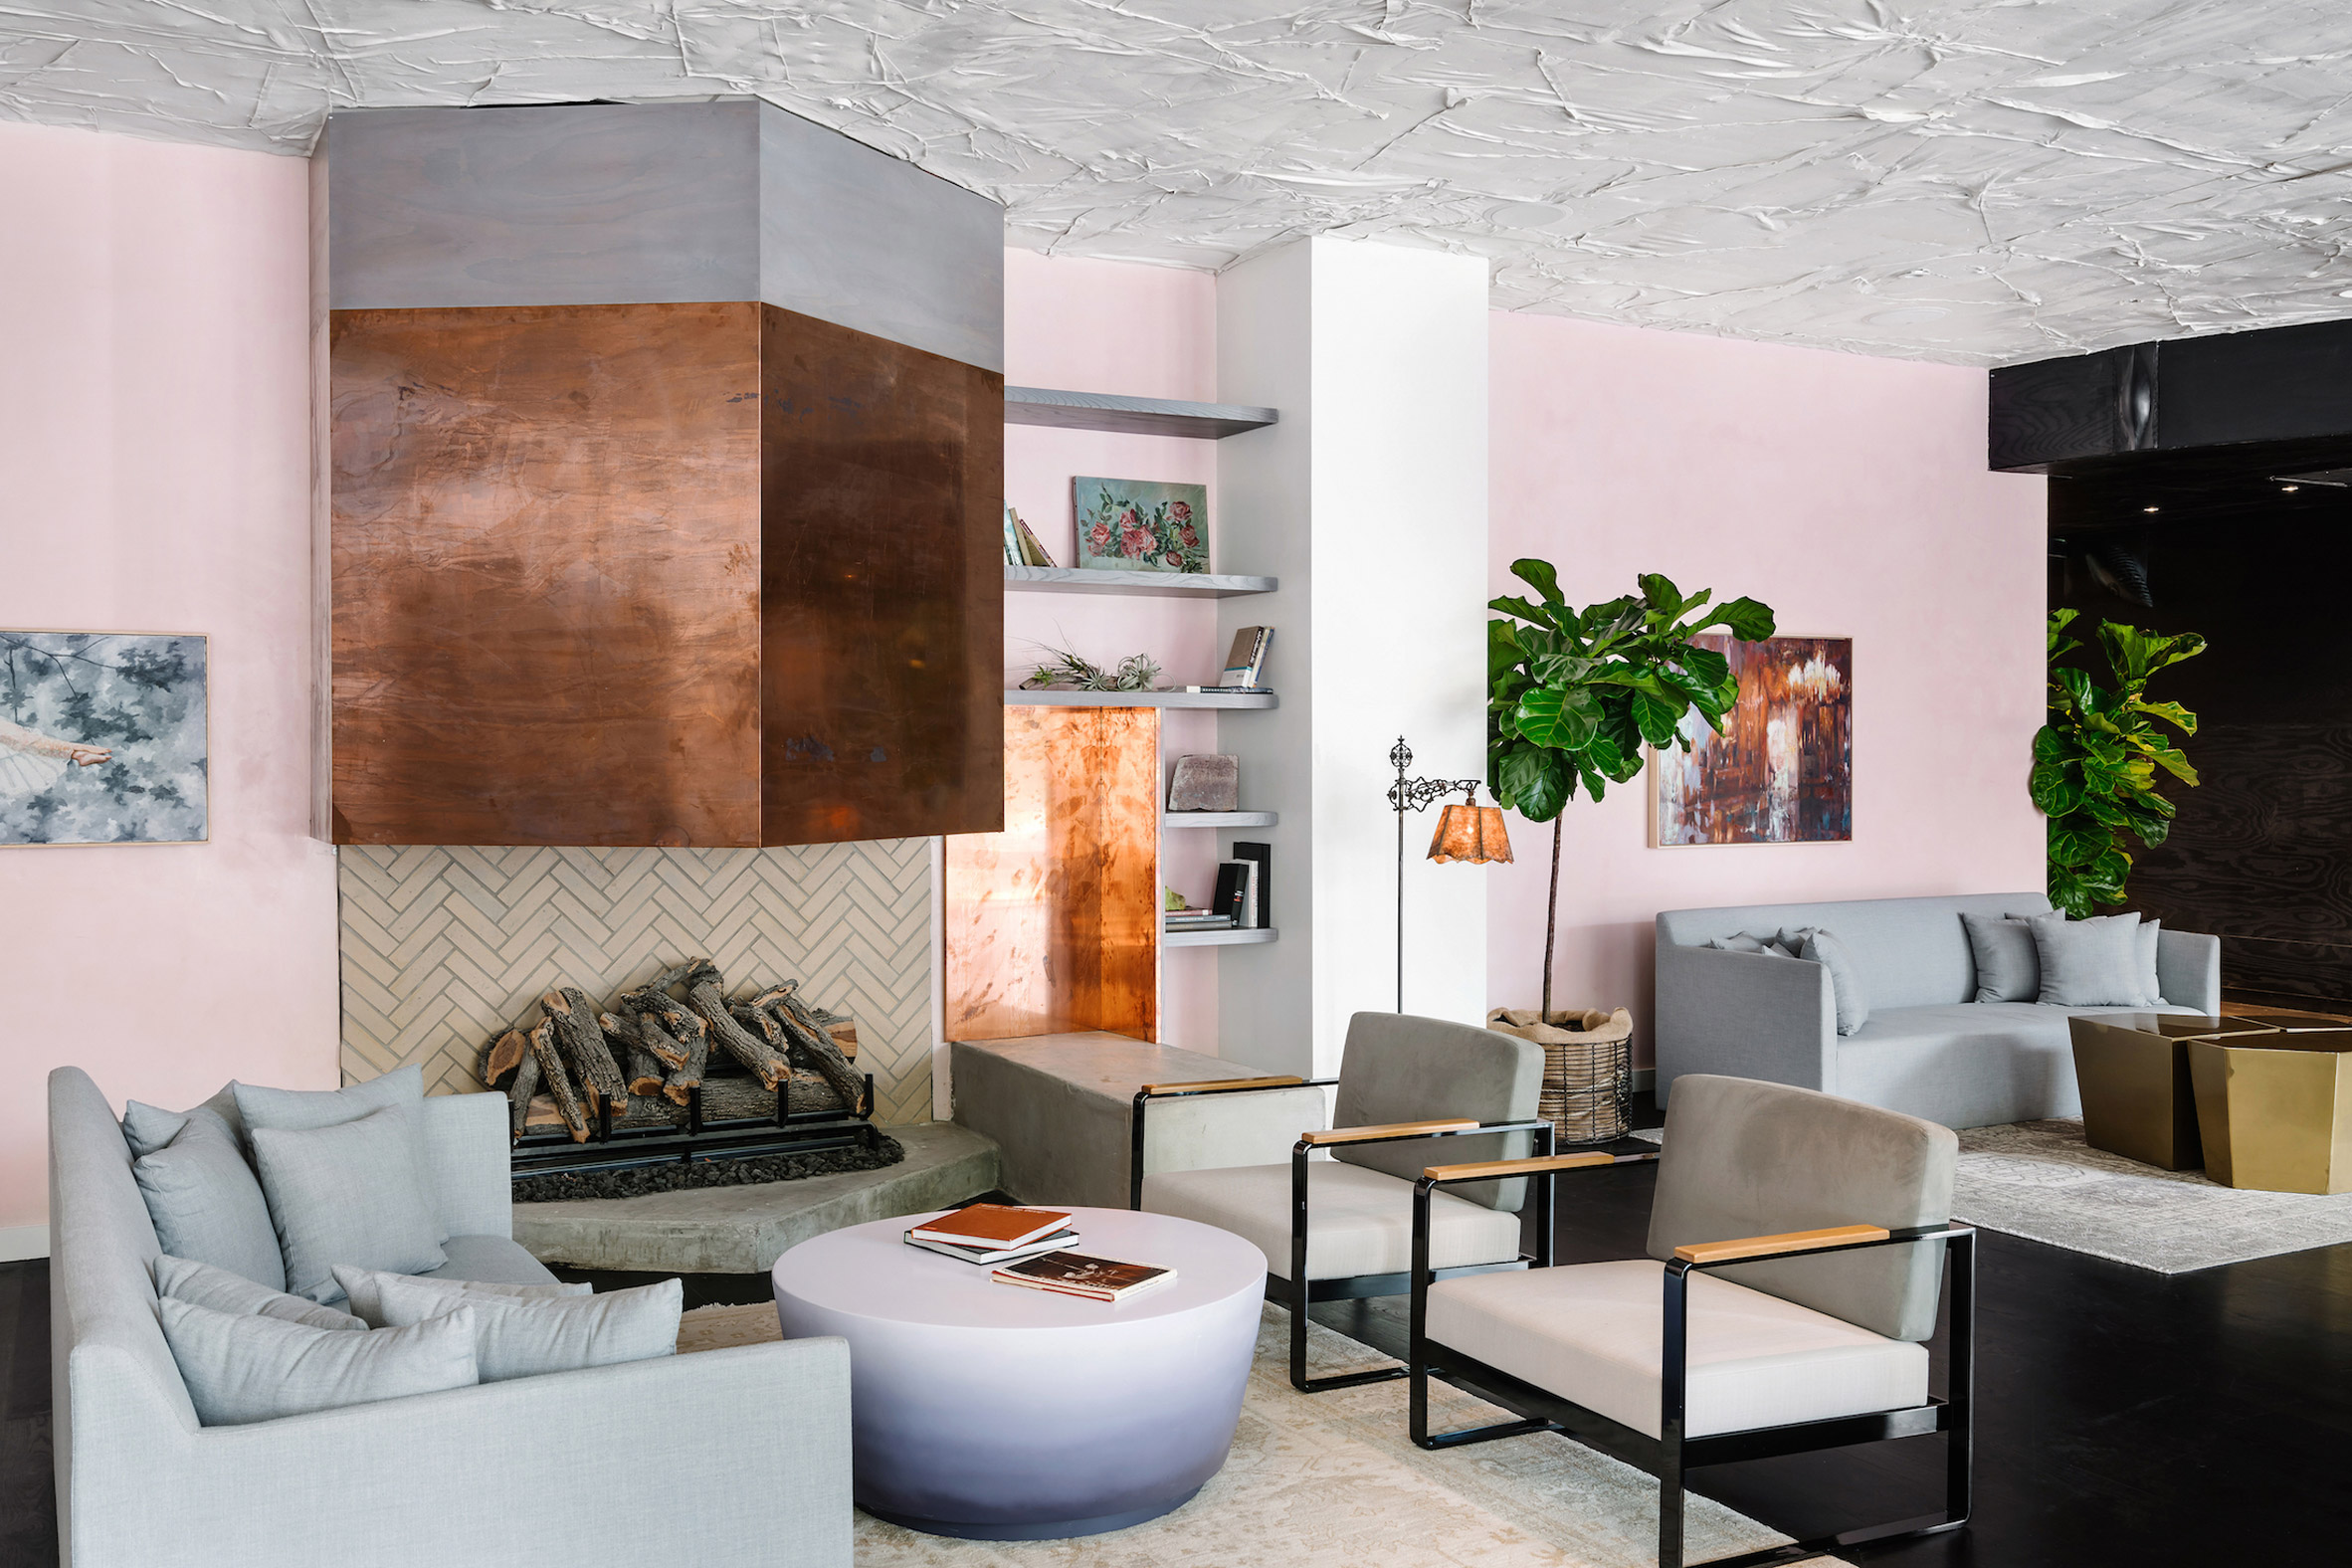 Mid-century tower becomes Line Austin hotel with interiors by Sean Knibb